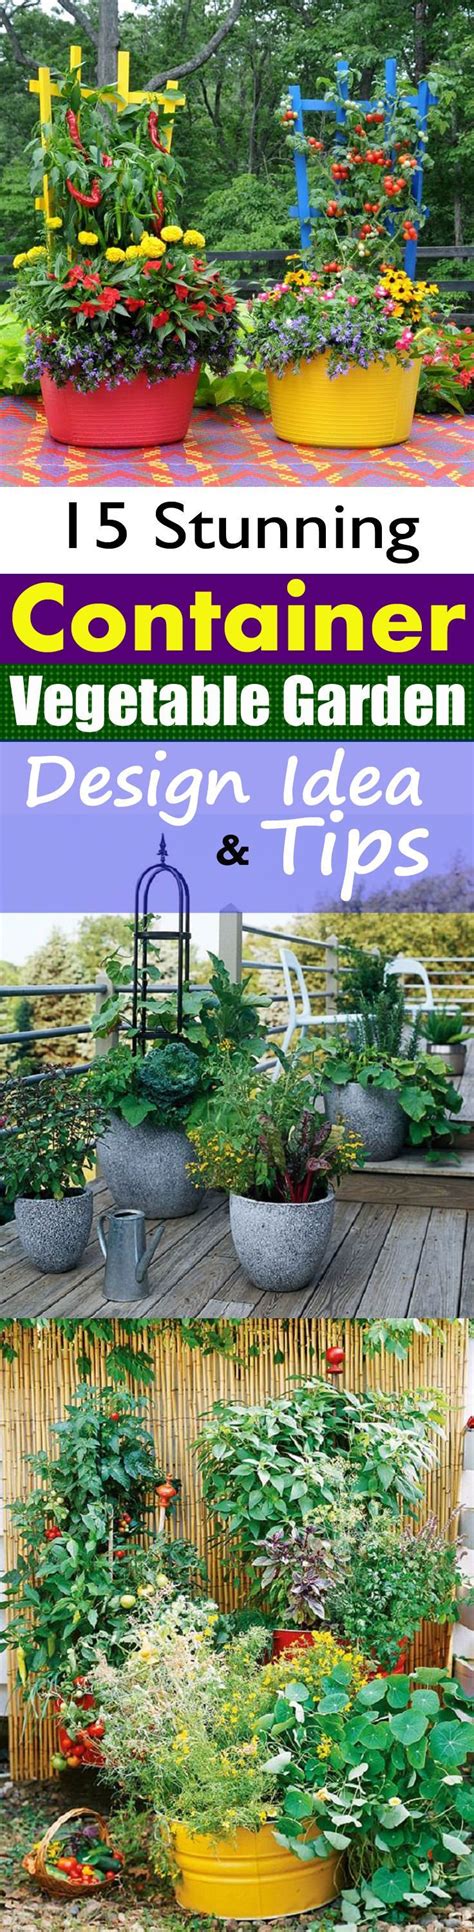 15 Stunning Container Vegetable Garden Design Ideas And Tips Container